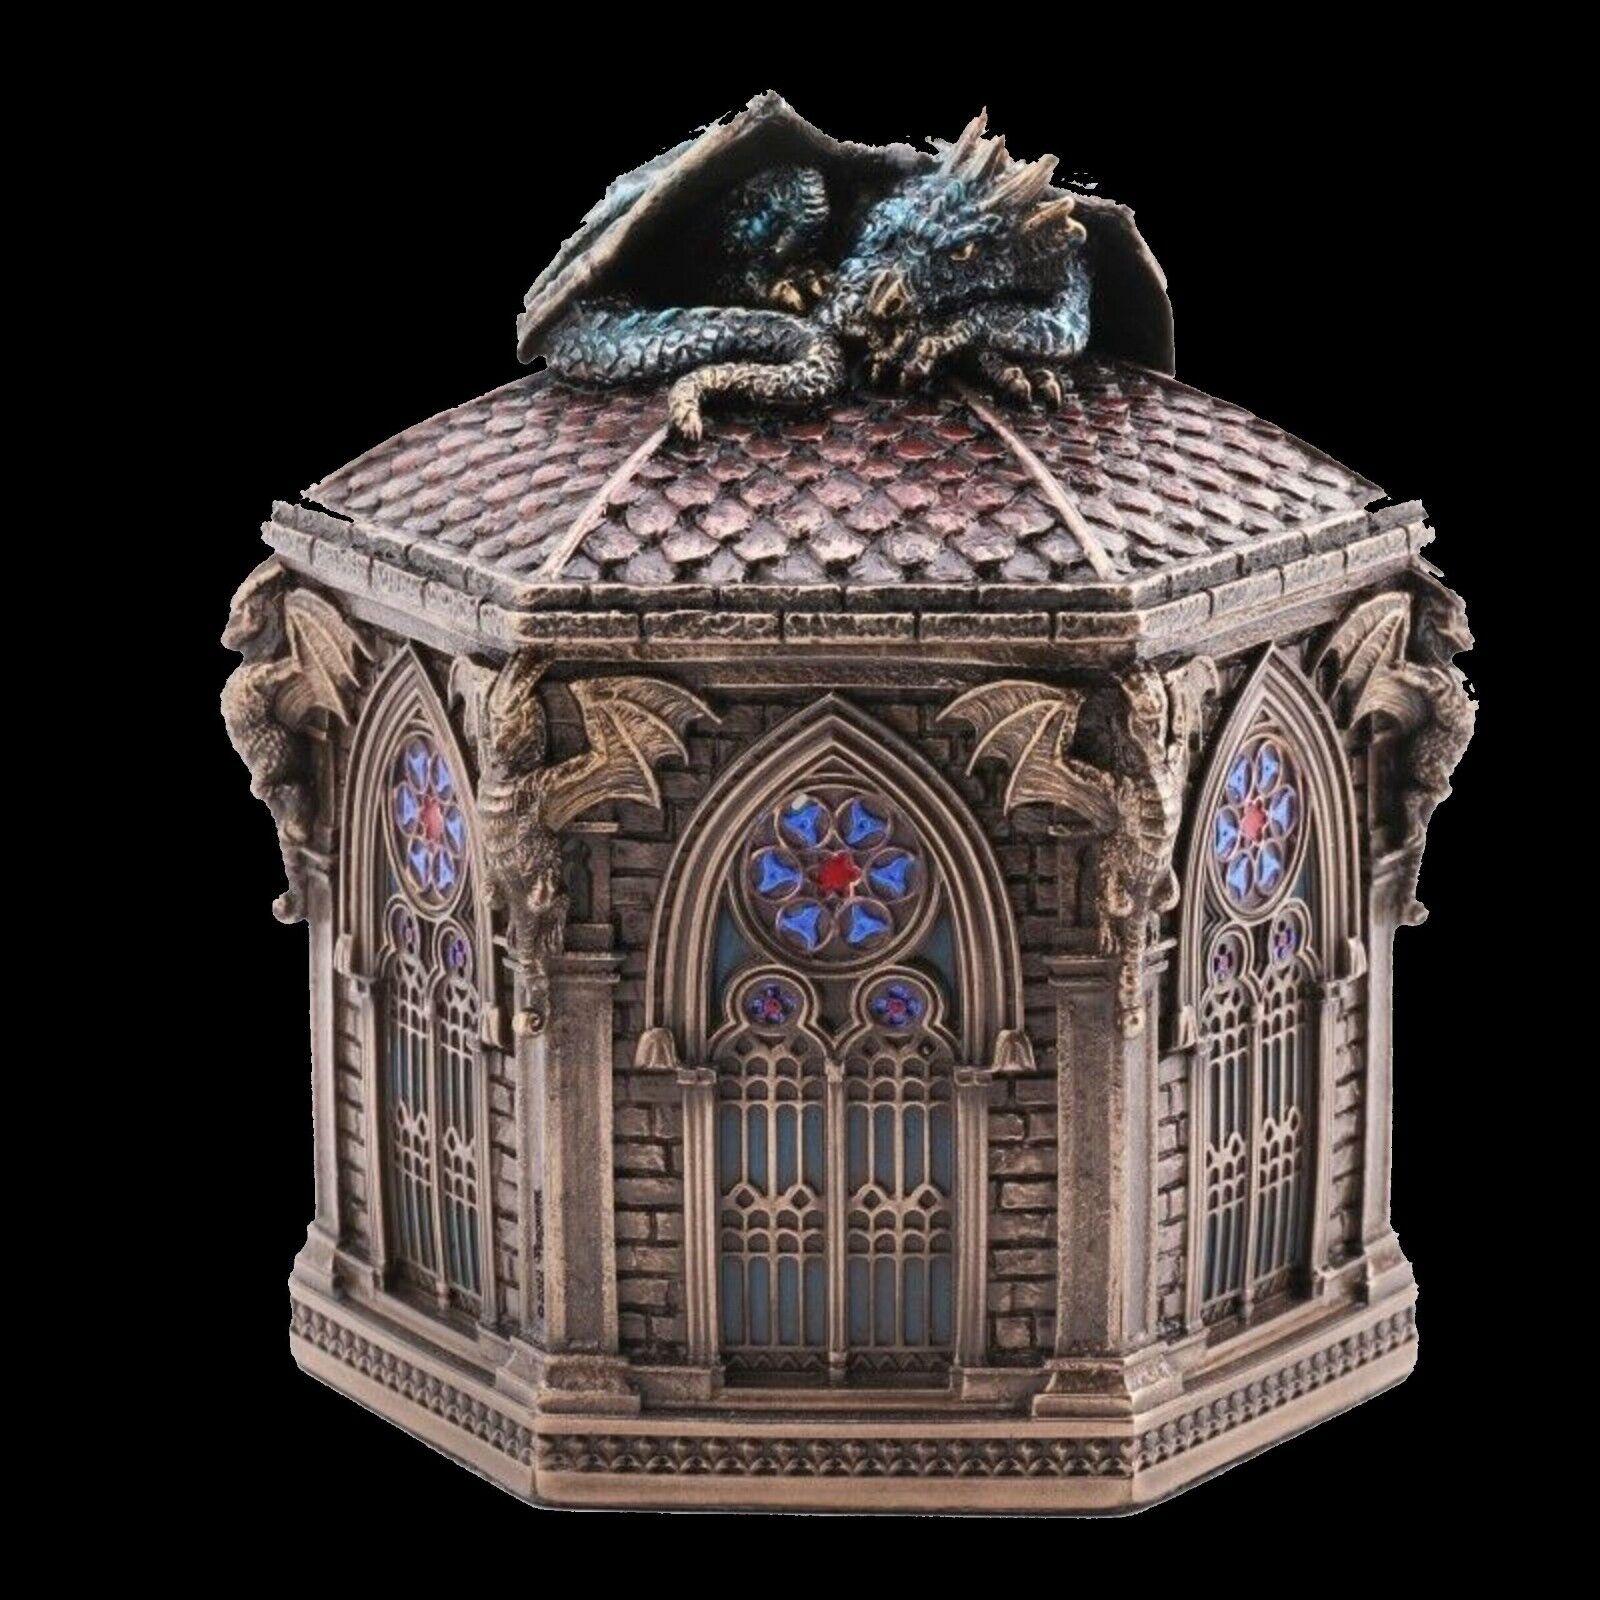 Dragon casket on the Cathedral WU78006A4